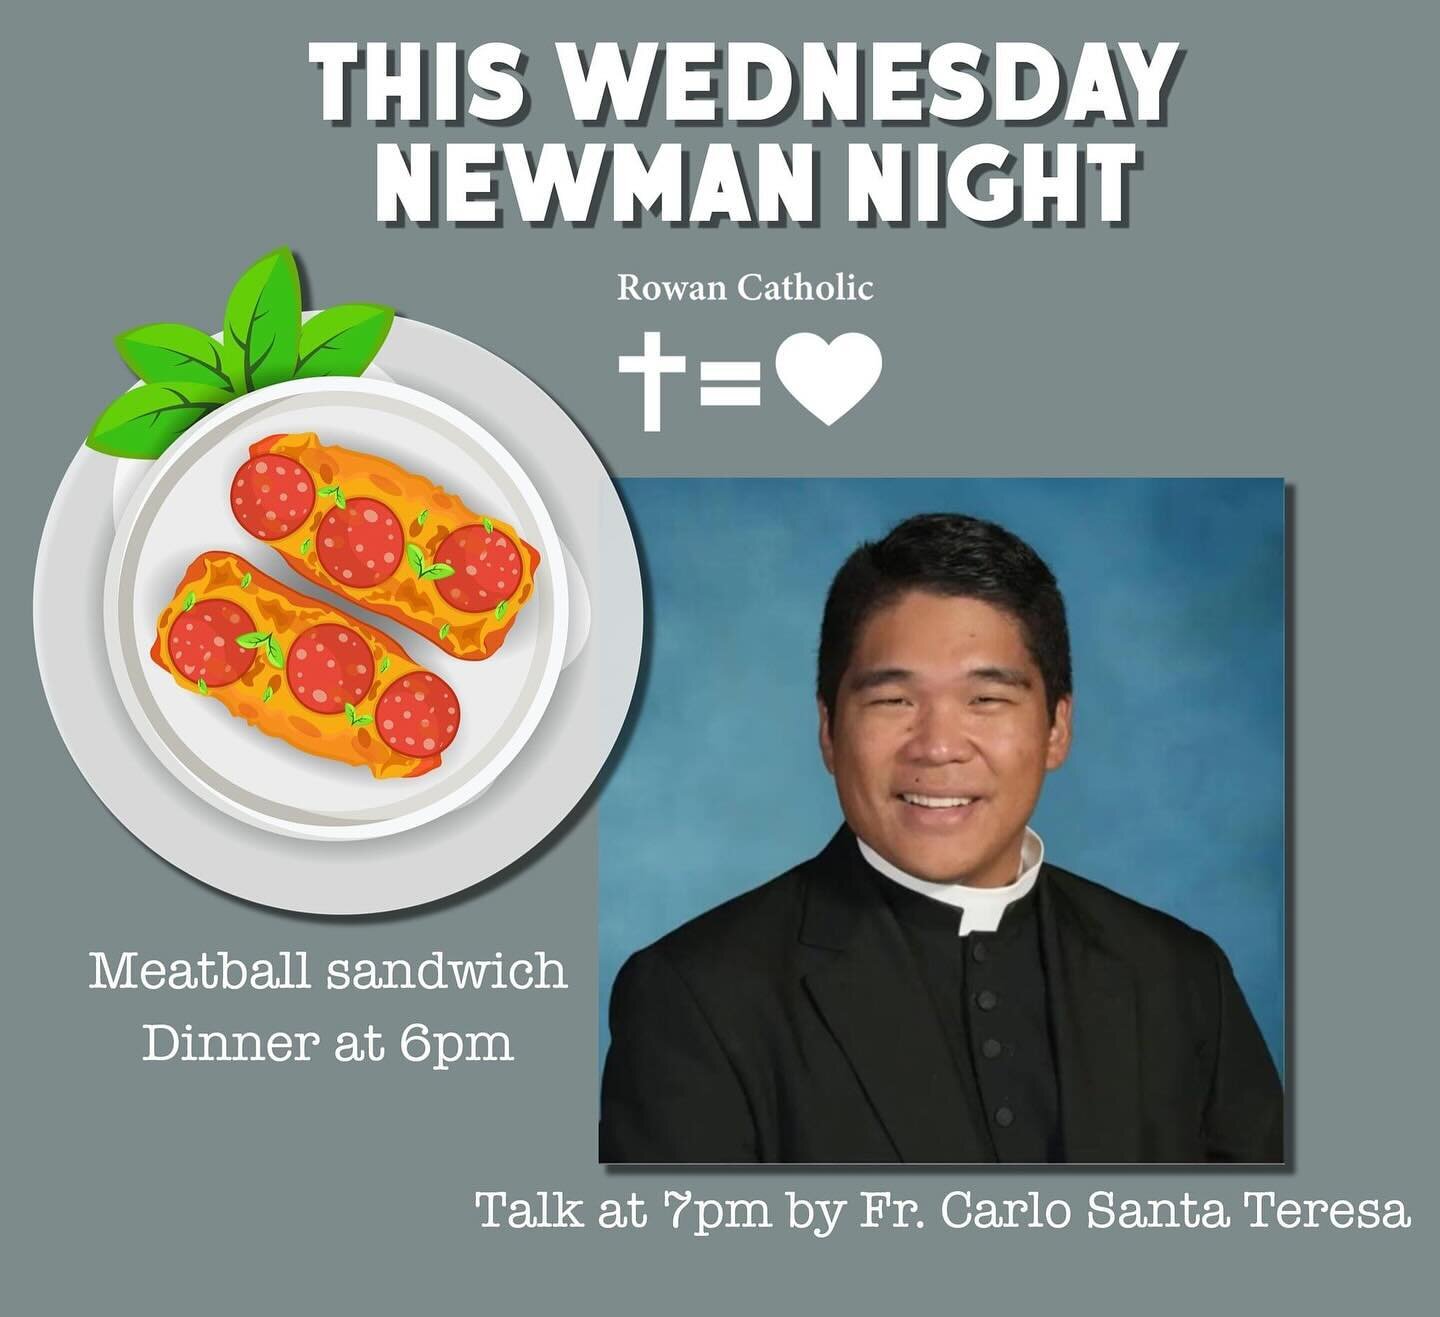 Students This Wednesday:  Meatball sandwich dinner at the Newman House at 6pm and meeting to follow at 7pm which is the first talk of our Vocation Series. Fr. Carlo Santa Teresa will be sharing his vocation story, which includes how God used an unfor